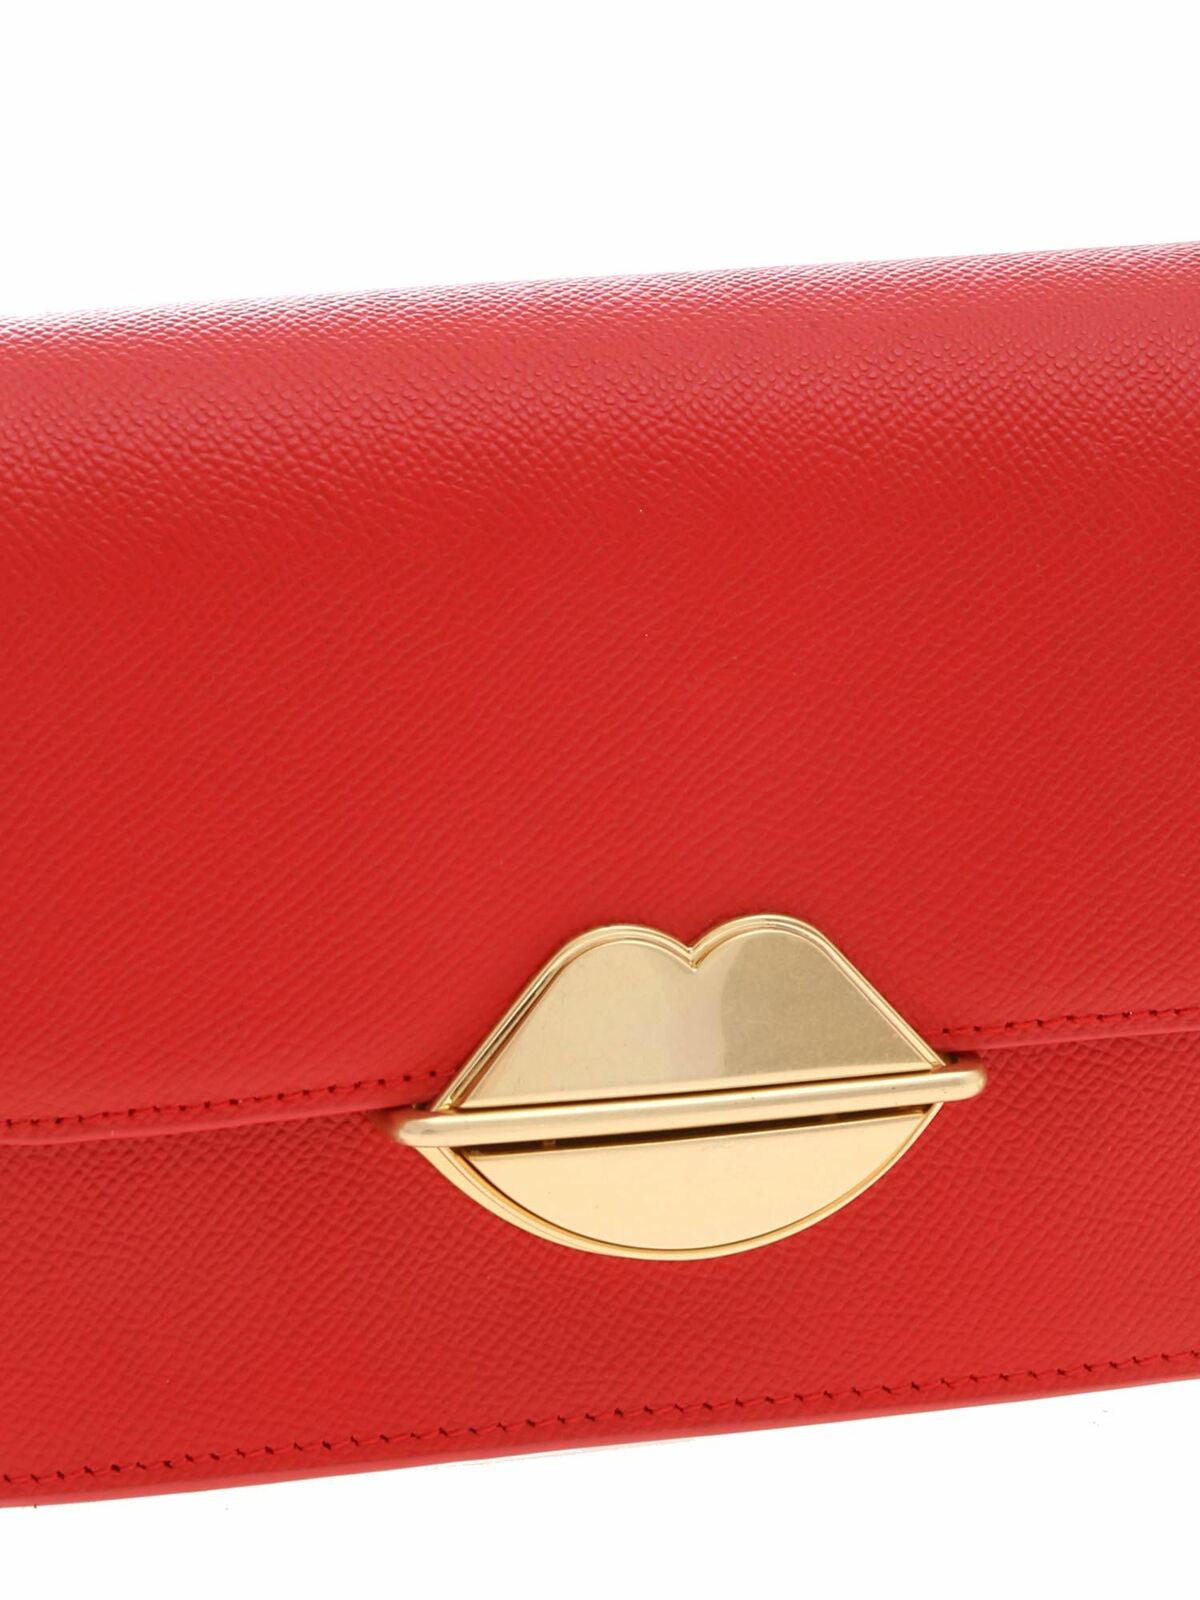 Shop Lulu Guinness Polly Bag In Red Hammered Leather In Rojo